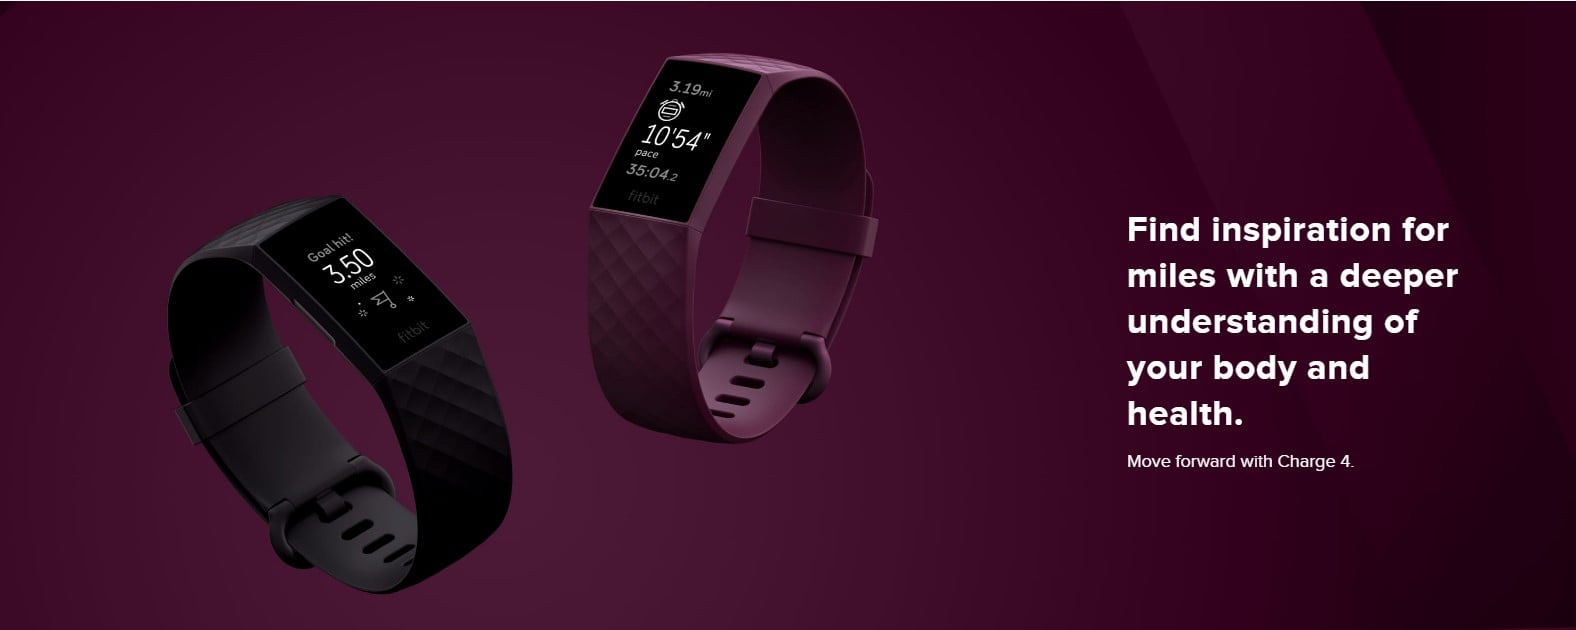 cheapest fitbit south africa